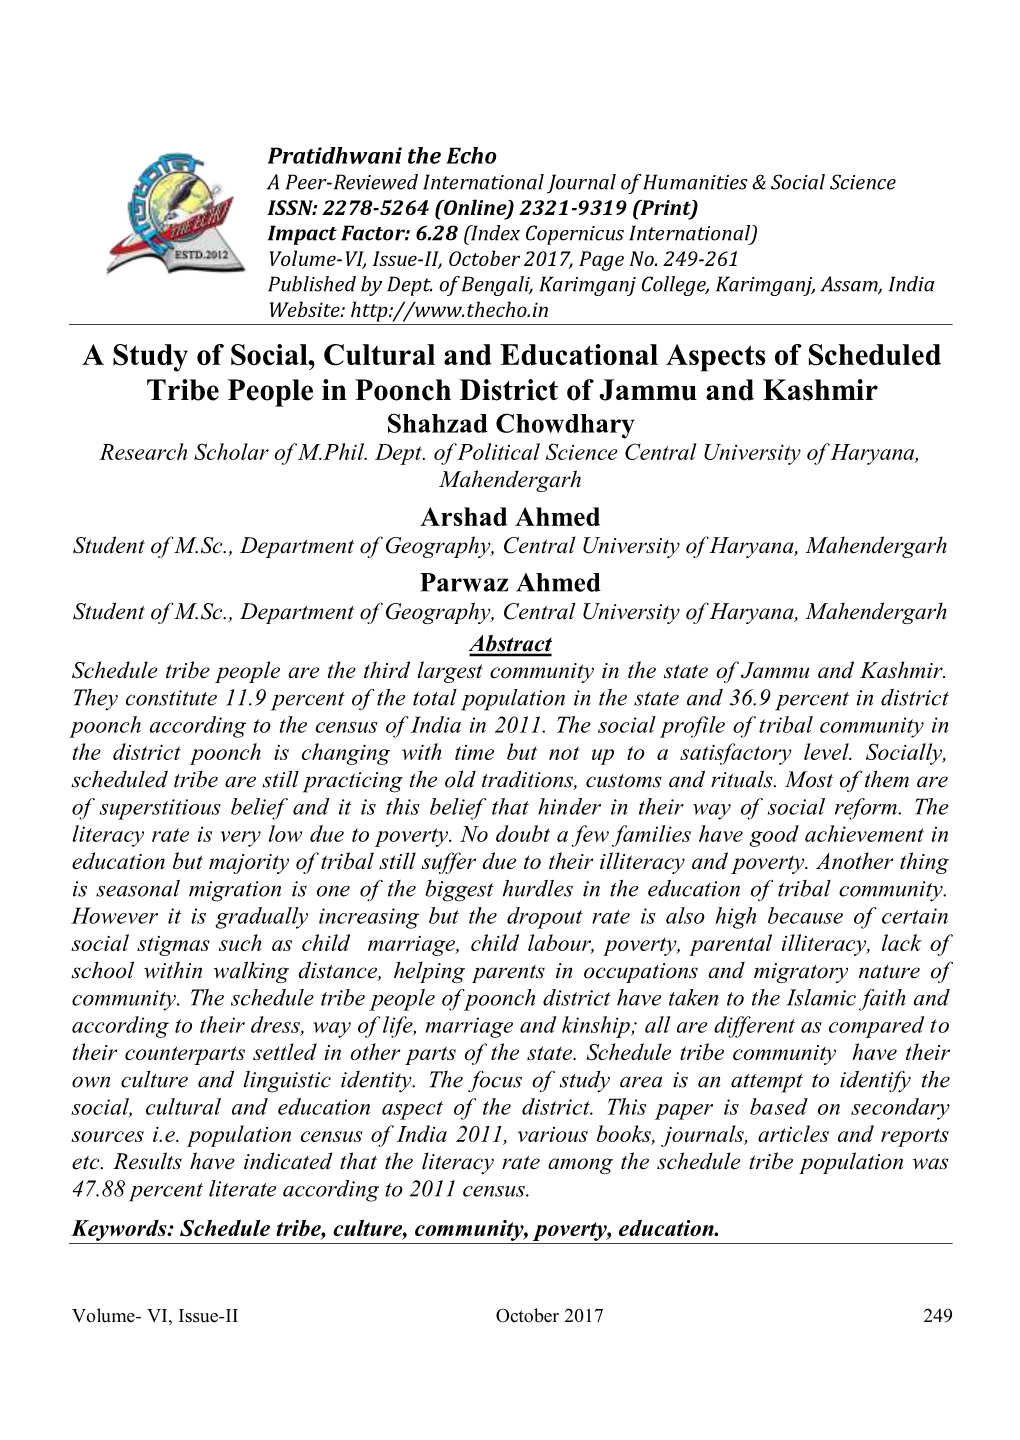 A Study of Social, Cultural and Educational Aspects of Scheduled Tribe People in Poonch District of Jammu and Kashmir Shahzad Chowdhary Research Scholar of M.Phil